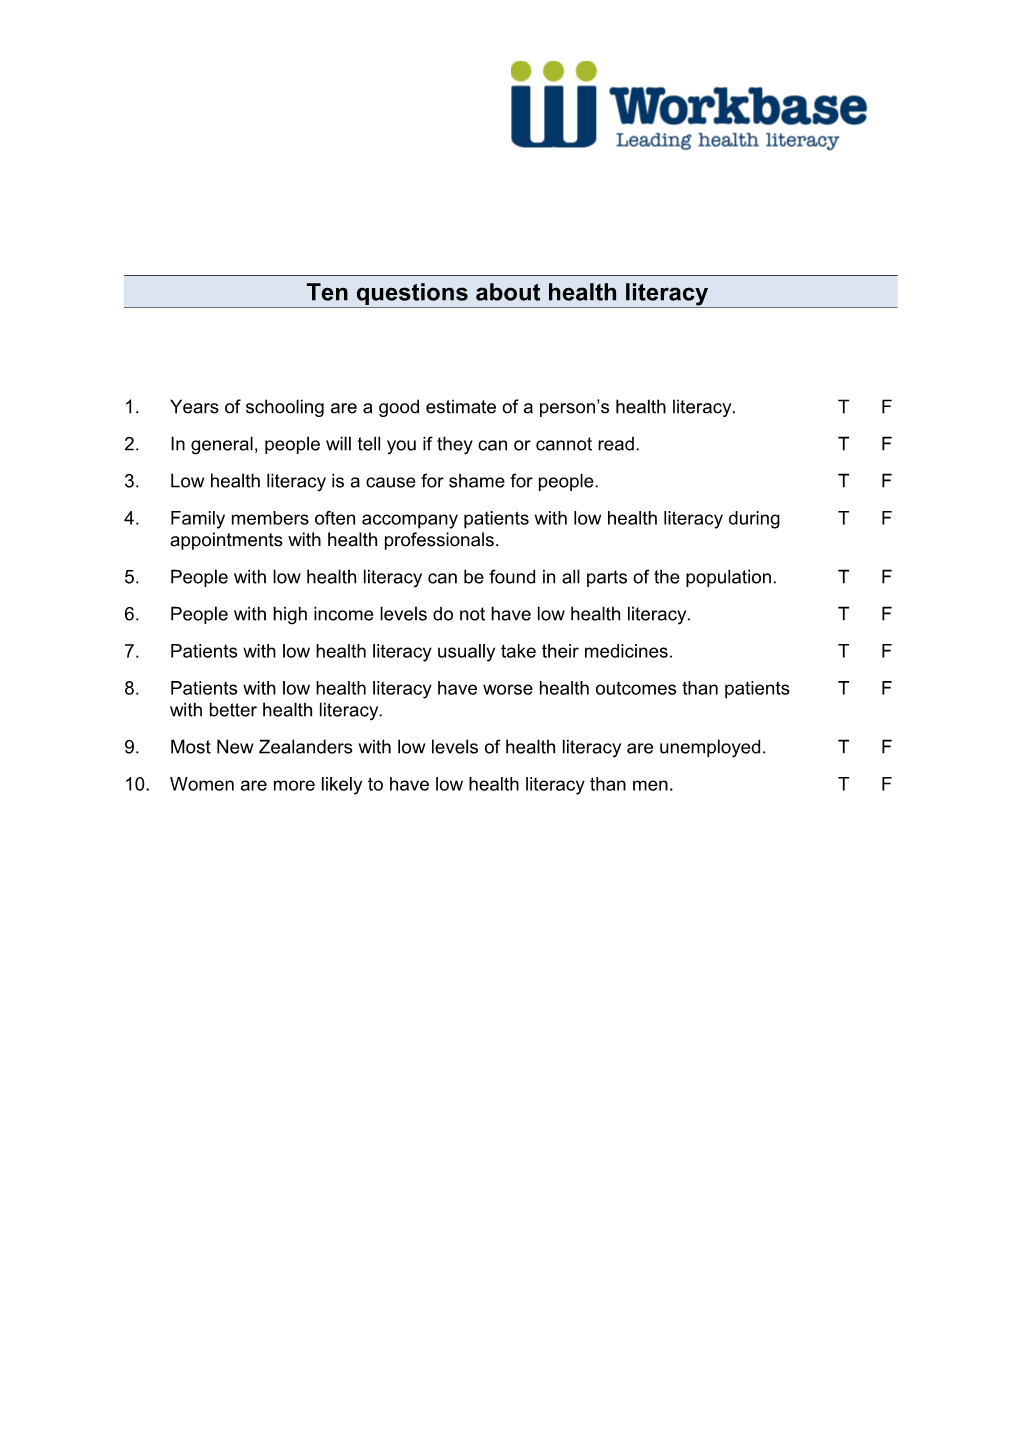 Ten Questions About Health Literacy